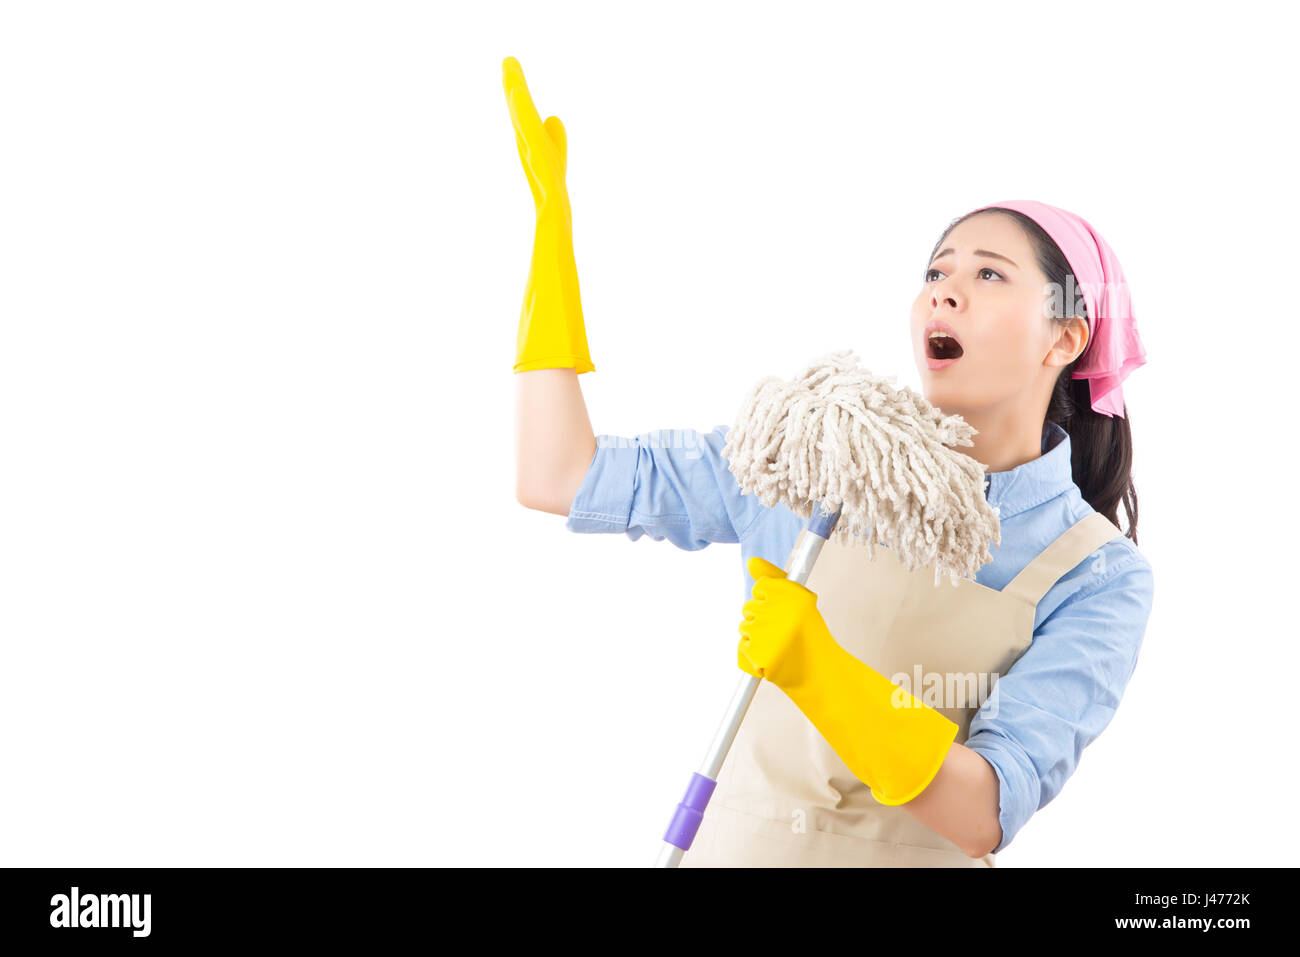 Mixed race Asian female cleaning woman having fun during spring cleaning. Funny woman cleaning wearing rubber gloves singing into broom. isolated on w Stock Photo